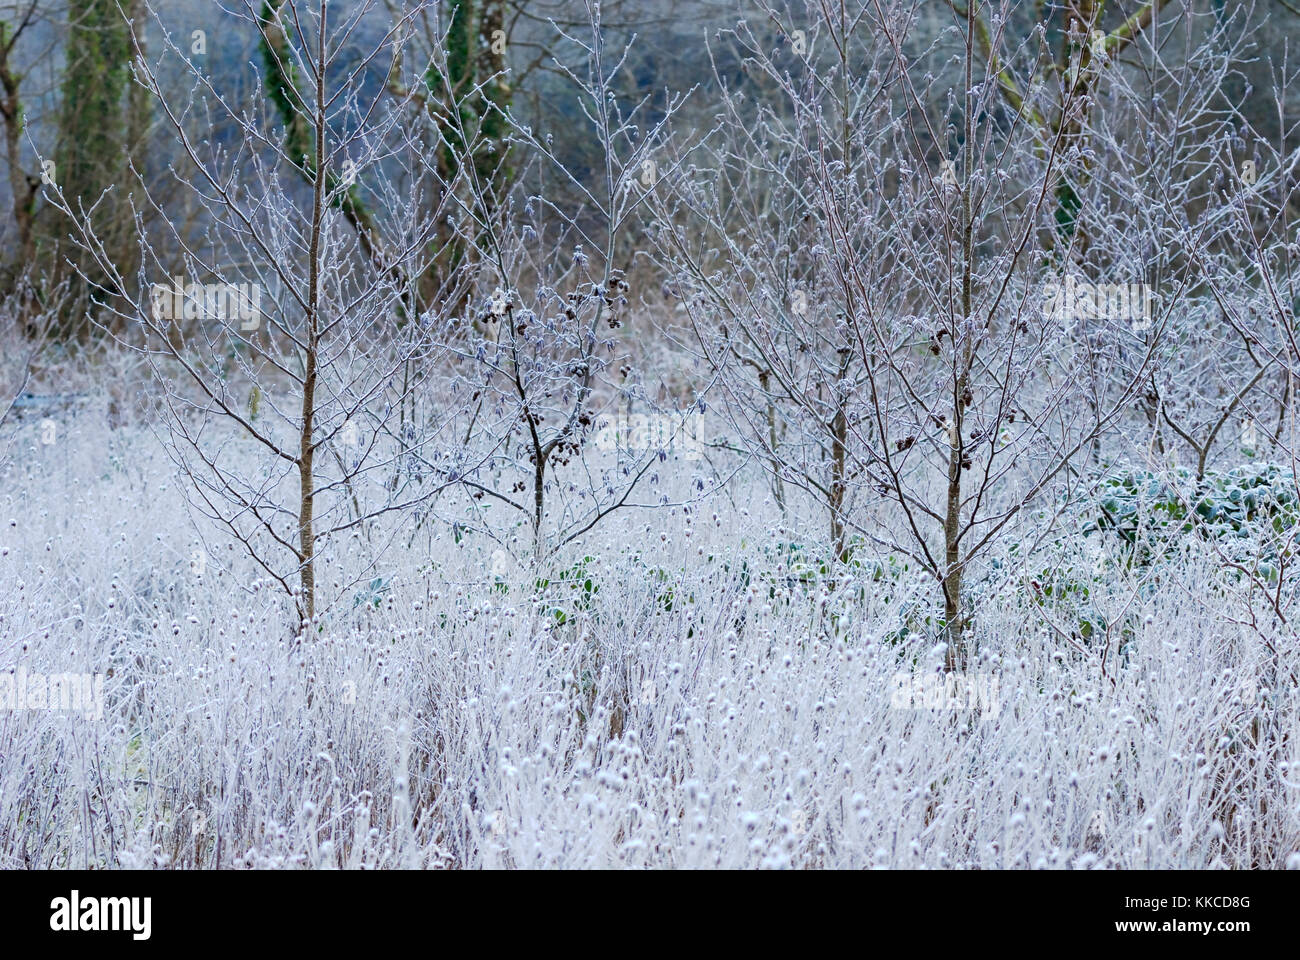 Young planted Alder trees, Alnus glutinosa in heavy frost, Wales, UK Stock Photo